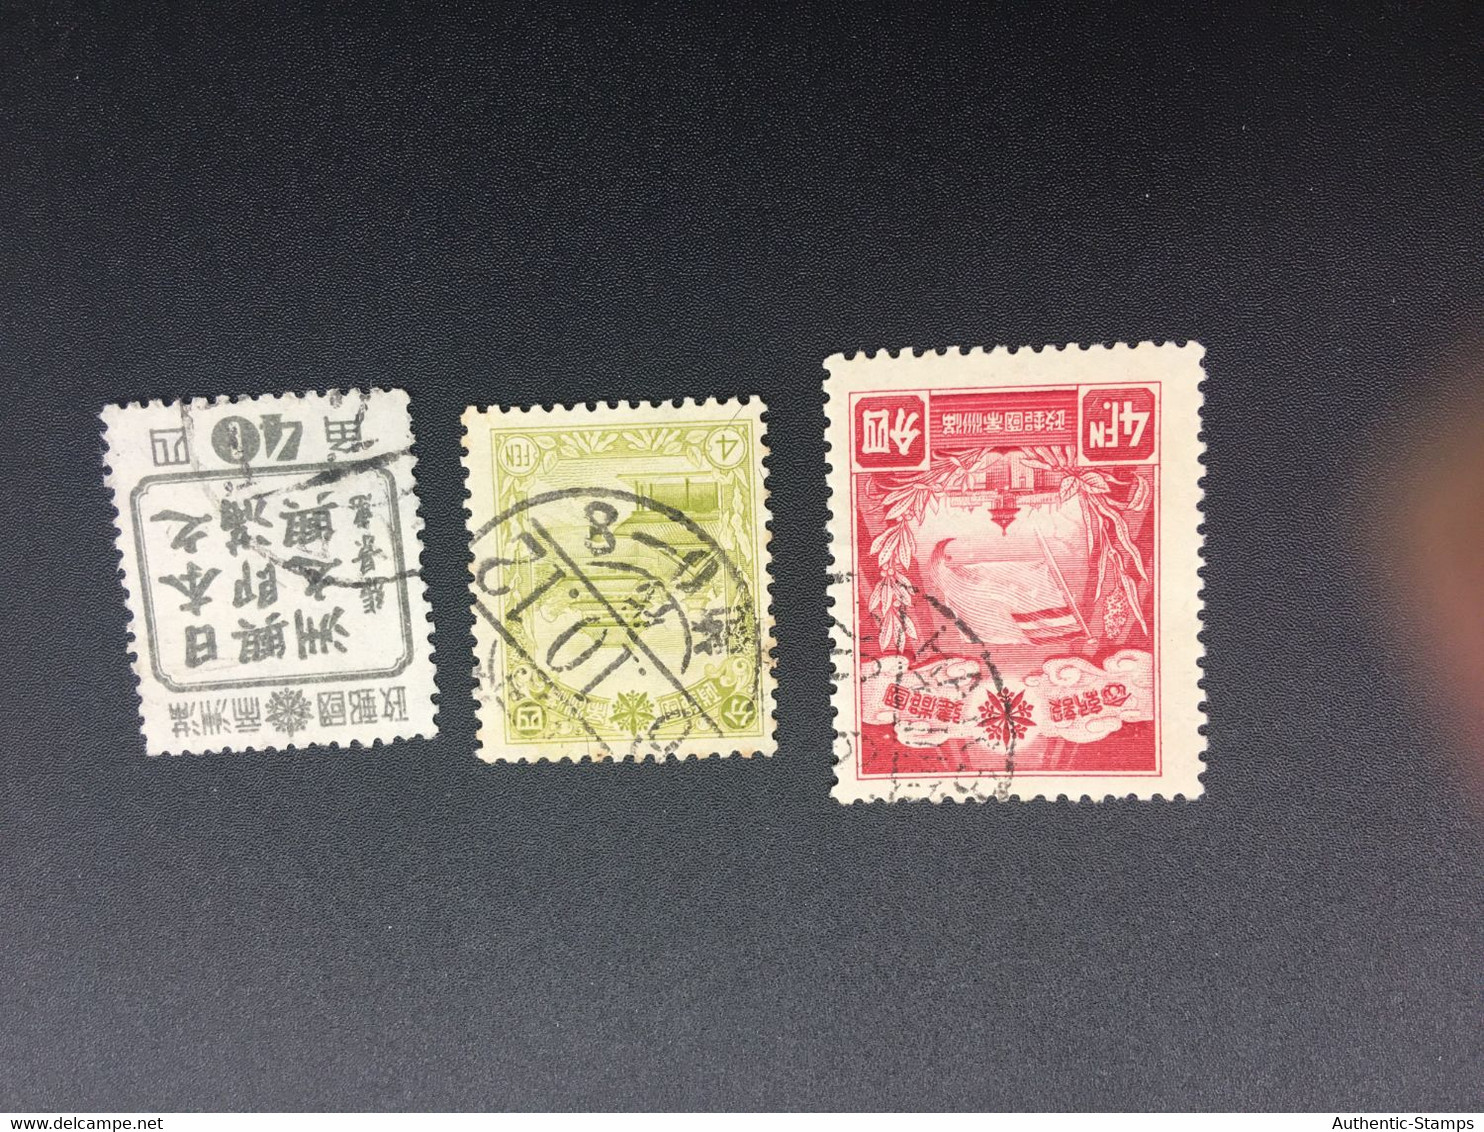 CHINA STAMP,  TIMBRO, STEMPEL,  CINA, CHINE, LIST 8265 - 1932-45 Mandchourie (Mandchoukouo)